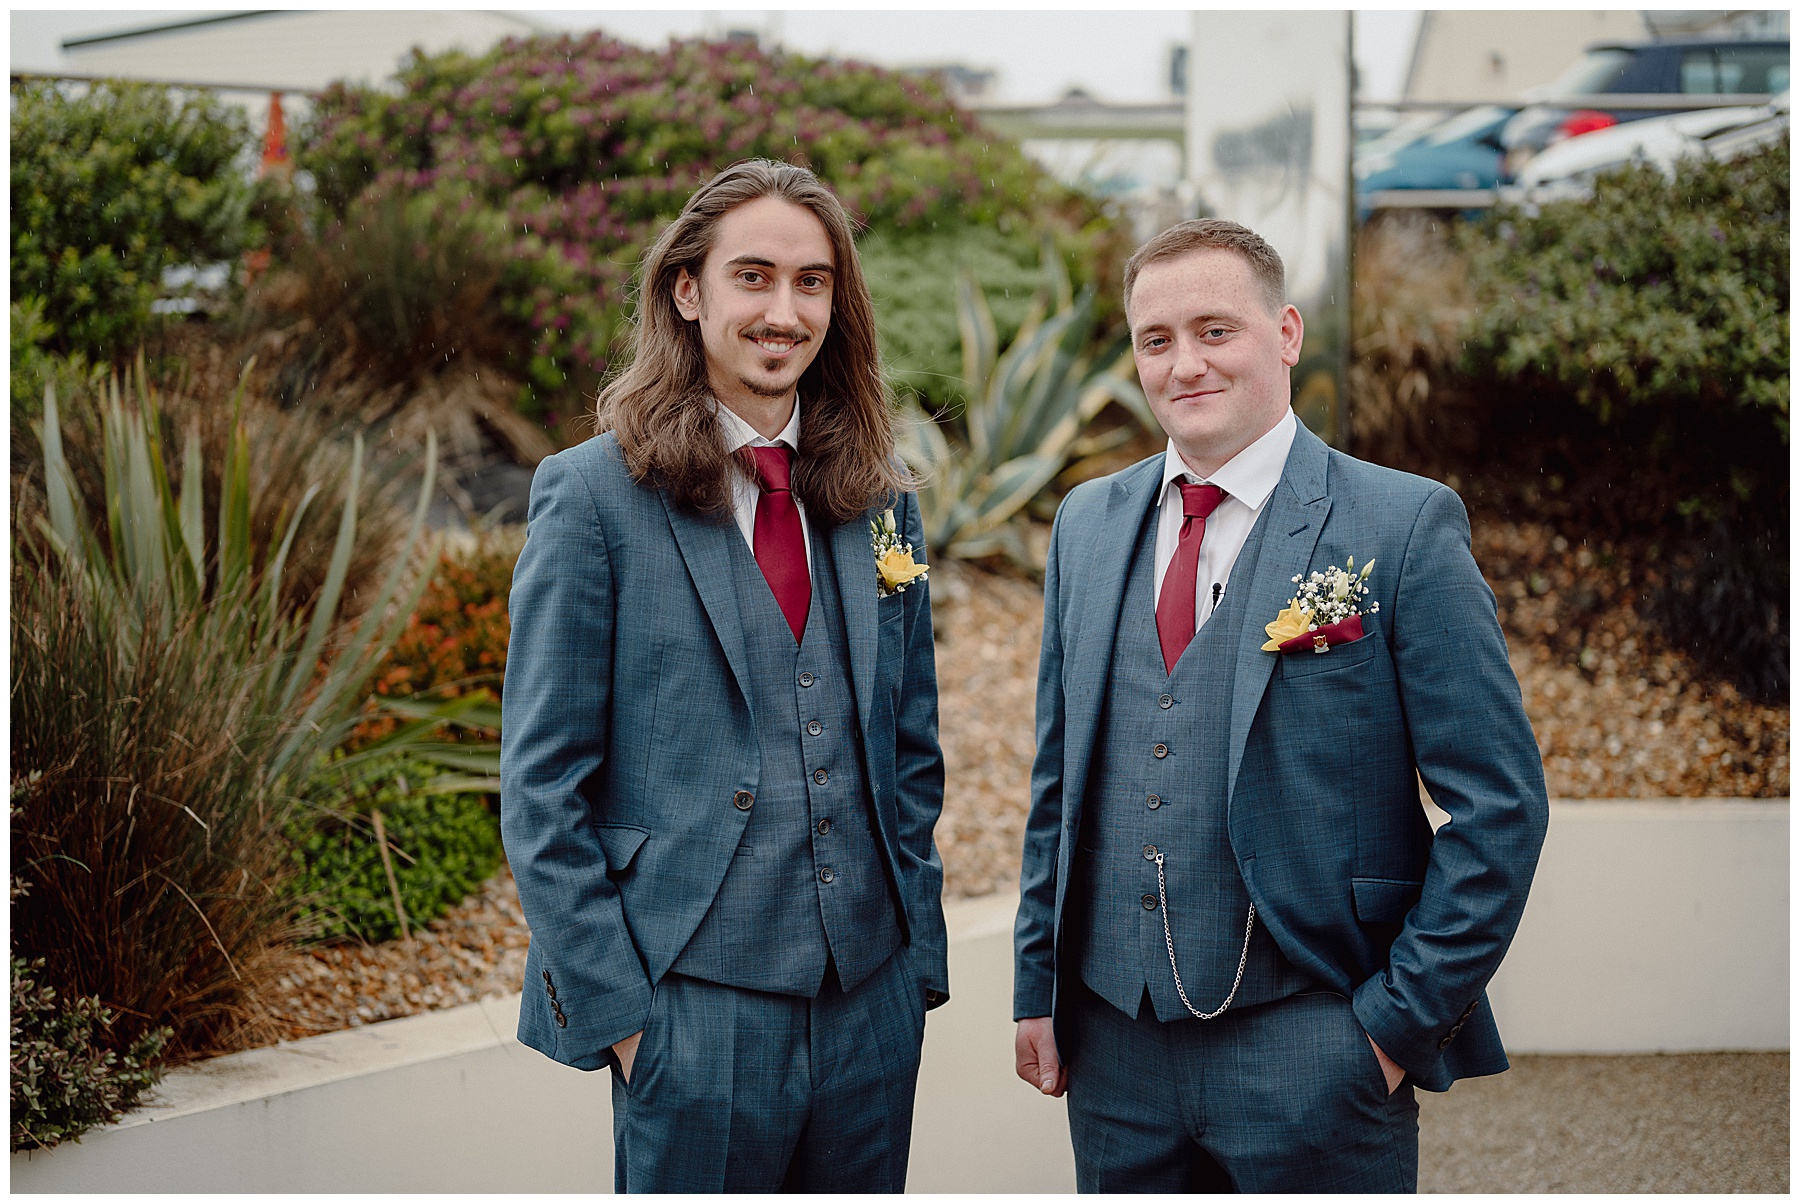 Groom and Best Man at Cliff Hotel Cardigan